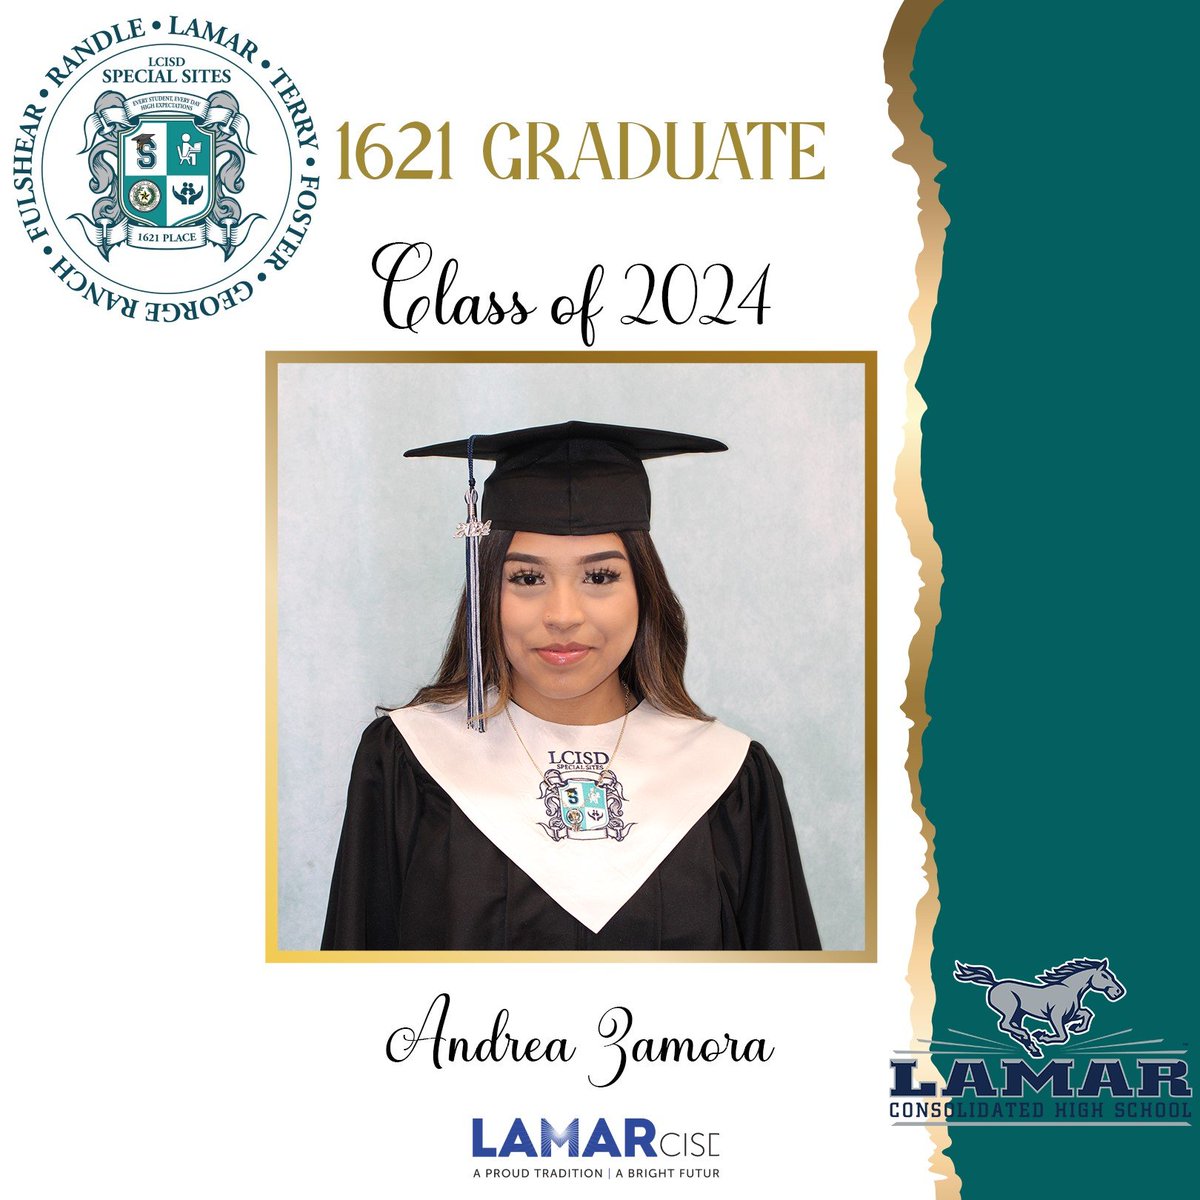 🎓Special Sites proudly congratulates Andrea Zuniga on being a confirmed graduate of Lamar Consolidated HS! Your hard work & determination at 1621 Place, LCISD’s ONLY School of Choice, have paid off, making you an official LCISD Graduate! Best wishes! #1621Place @THELamarCHS